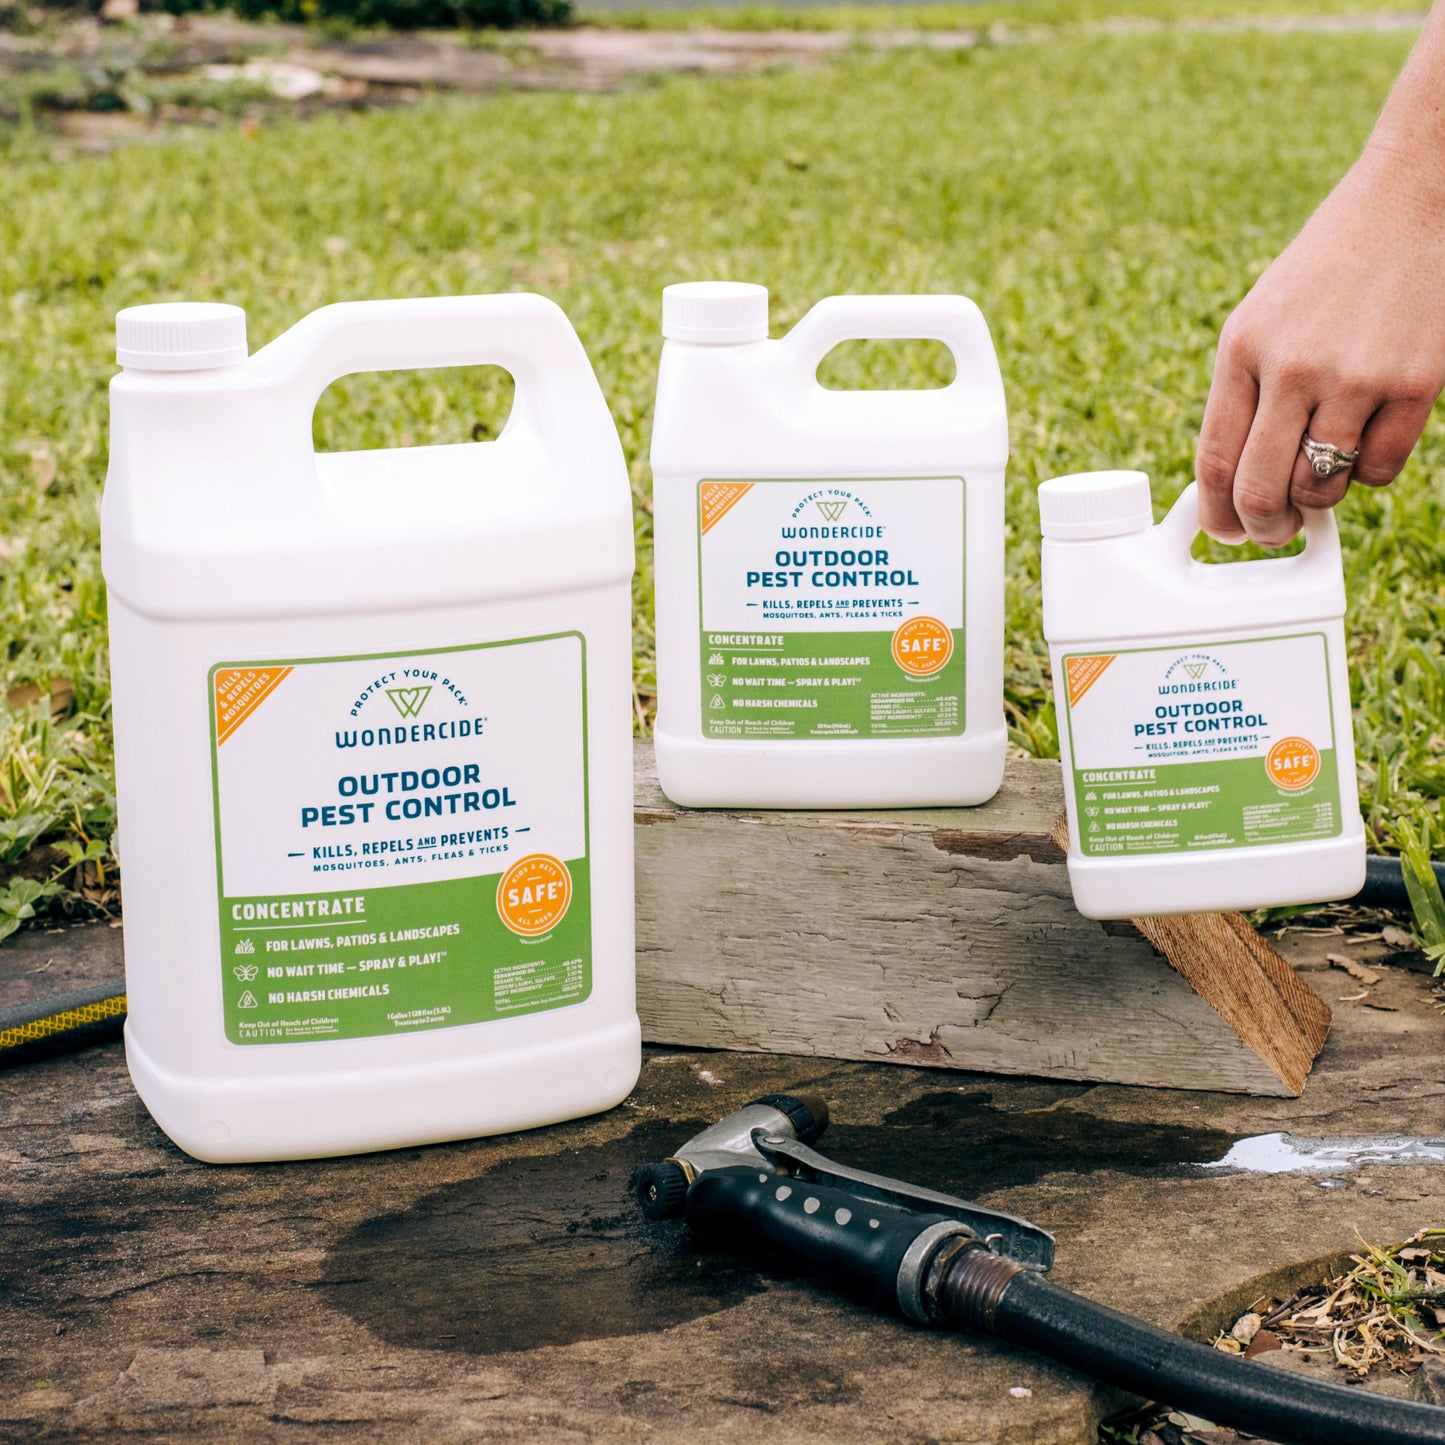 Wondercide Announces New Plant-Powered Pest Protection Products